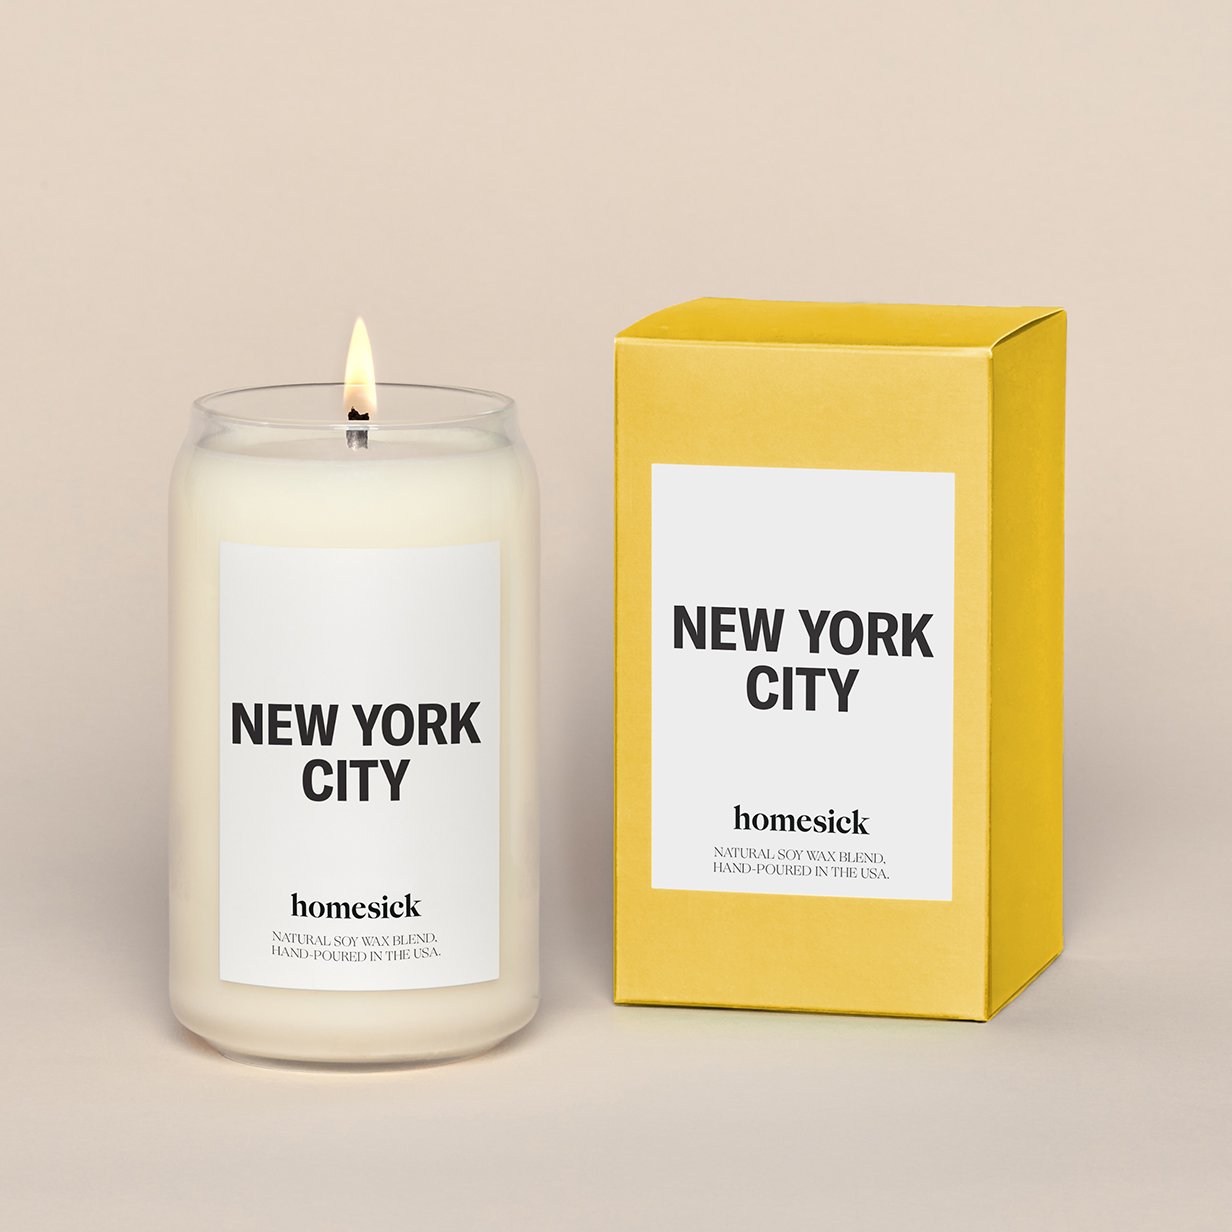 Homesick Homesick New York City Candle available at The Good Life Boutique